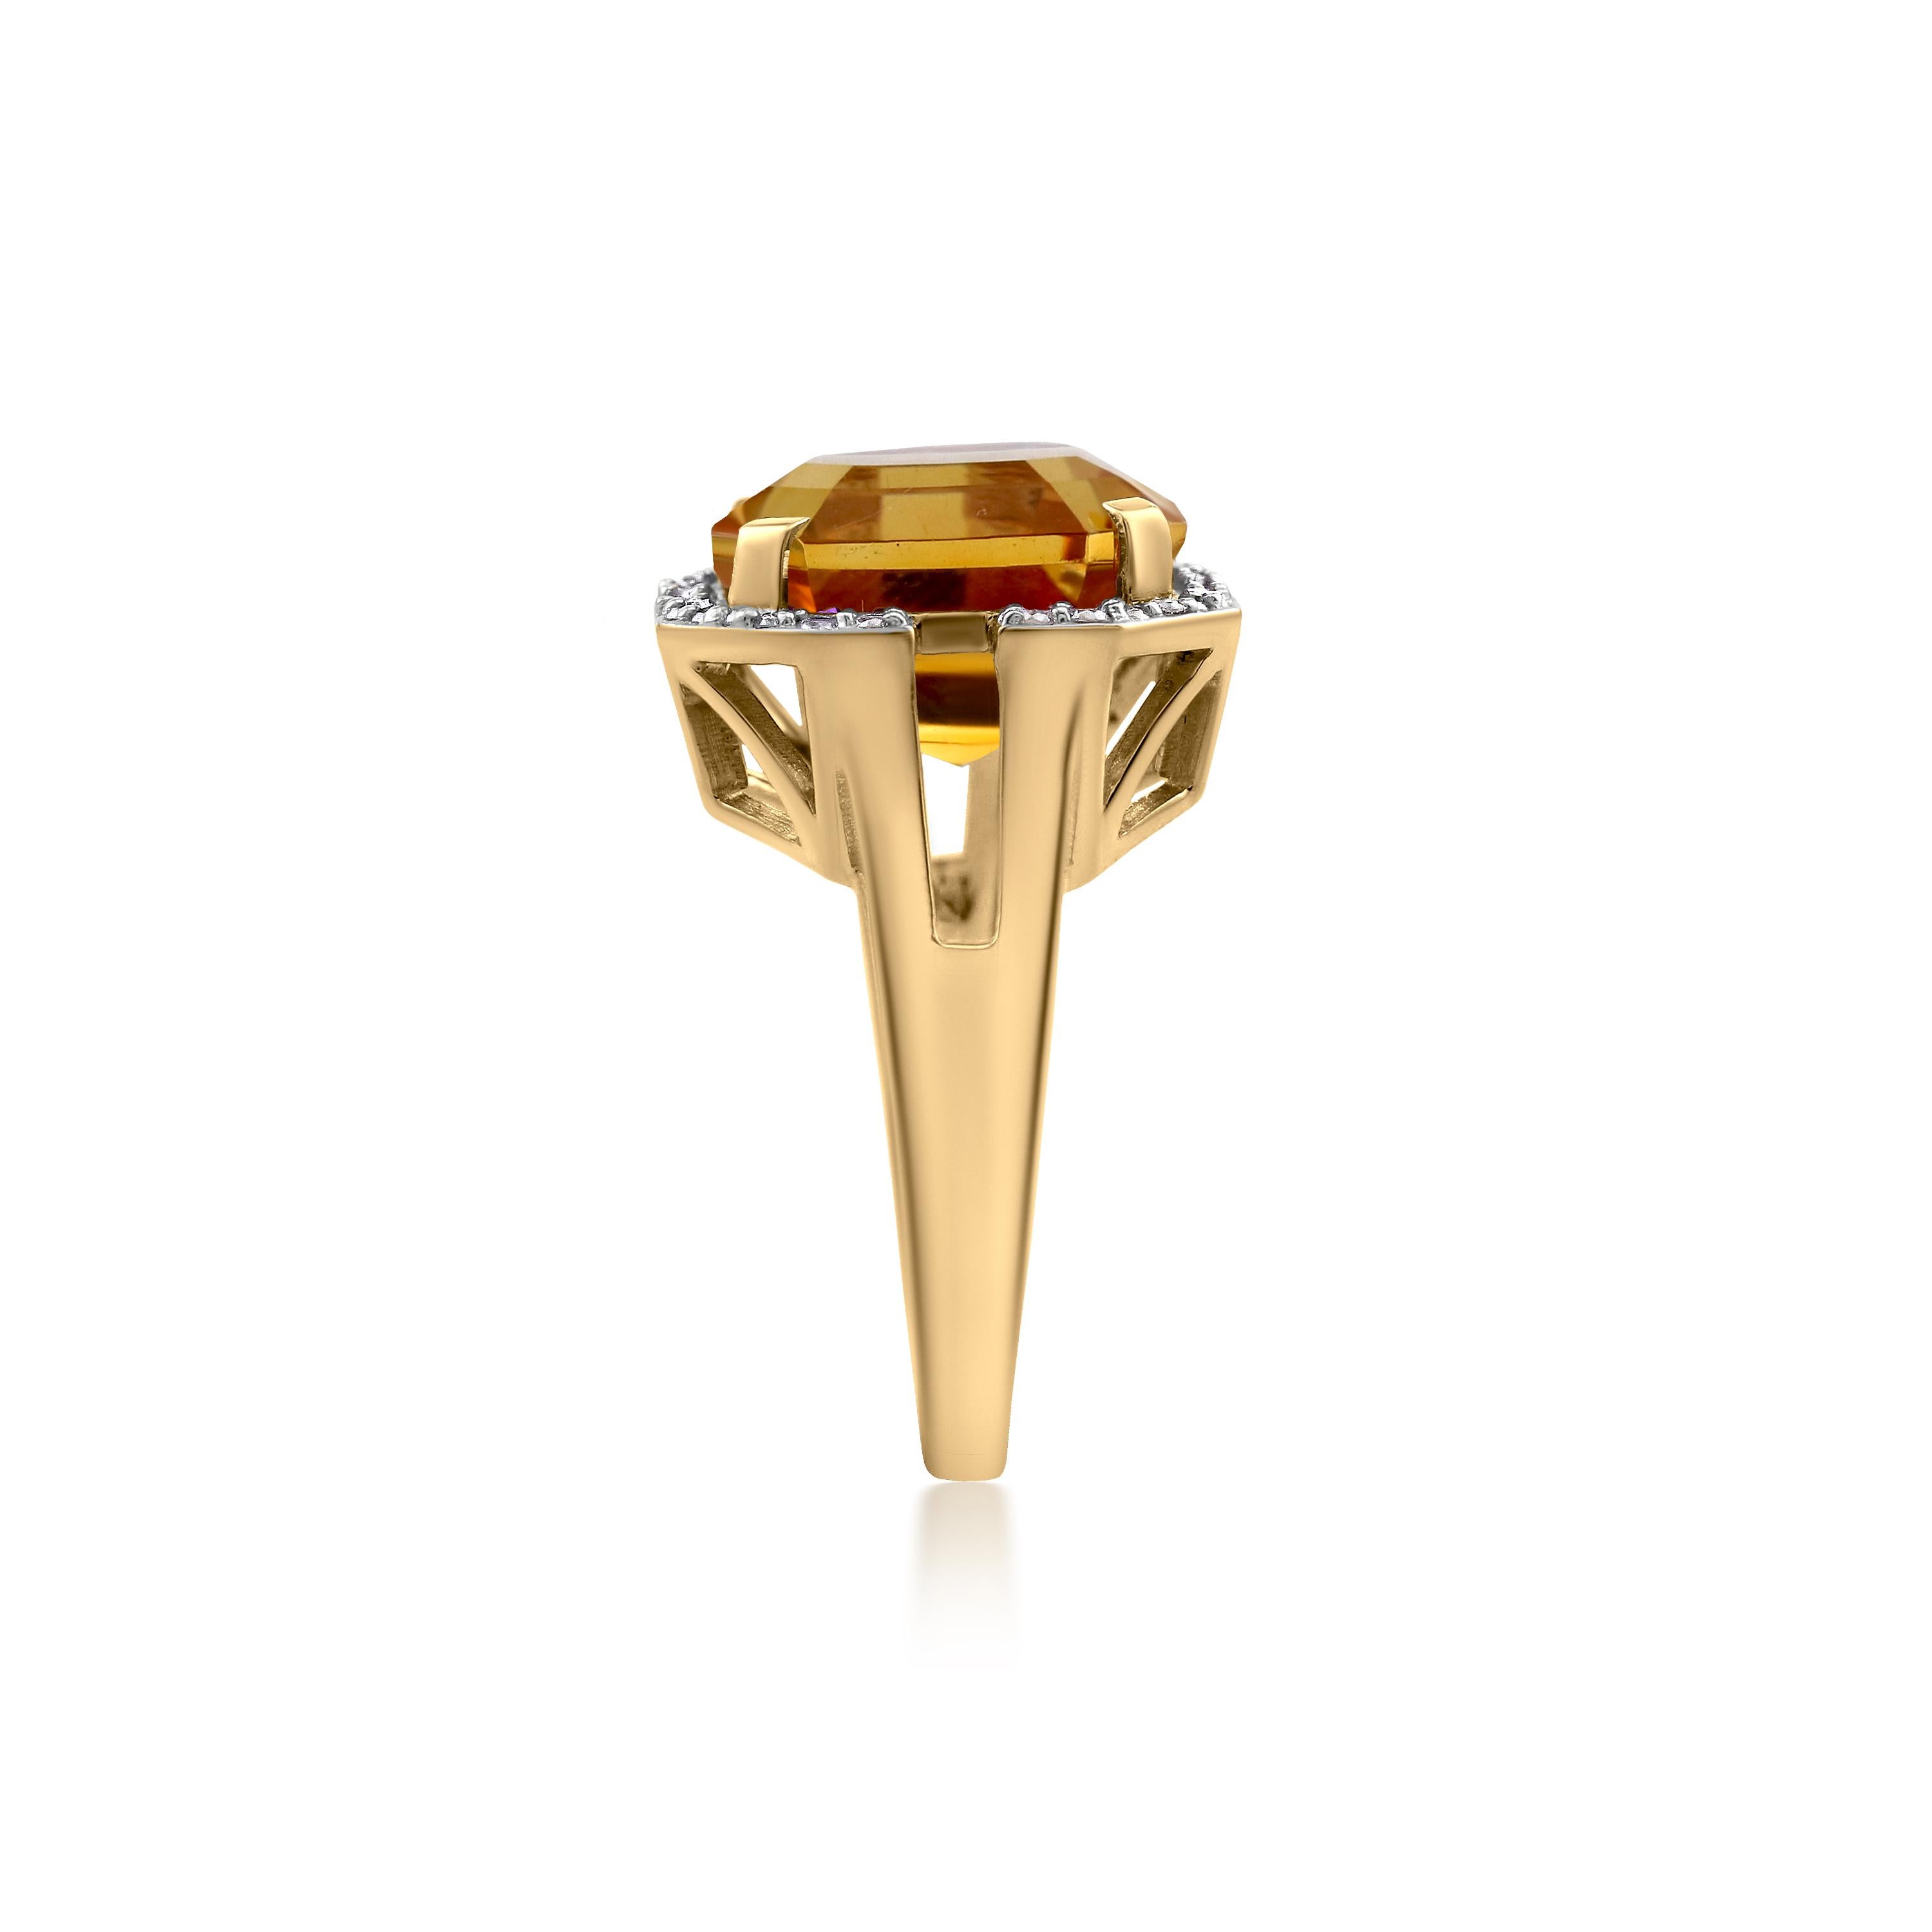 Gemistry 7.4 Carat Asscher Cut Citrine Solitaire Ring with Diamond in 14K Gold 3